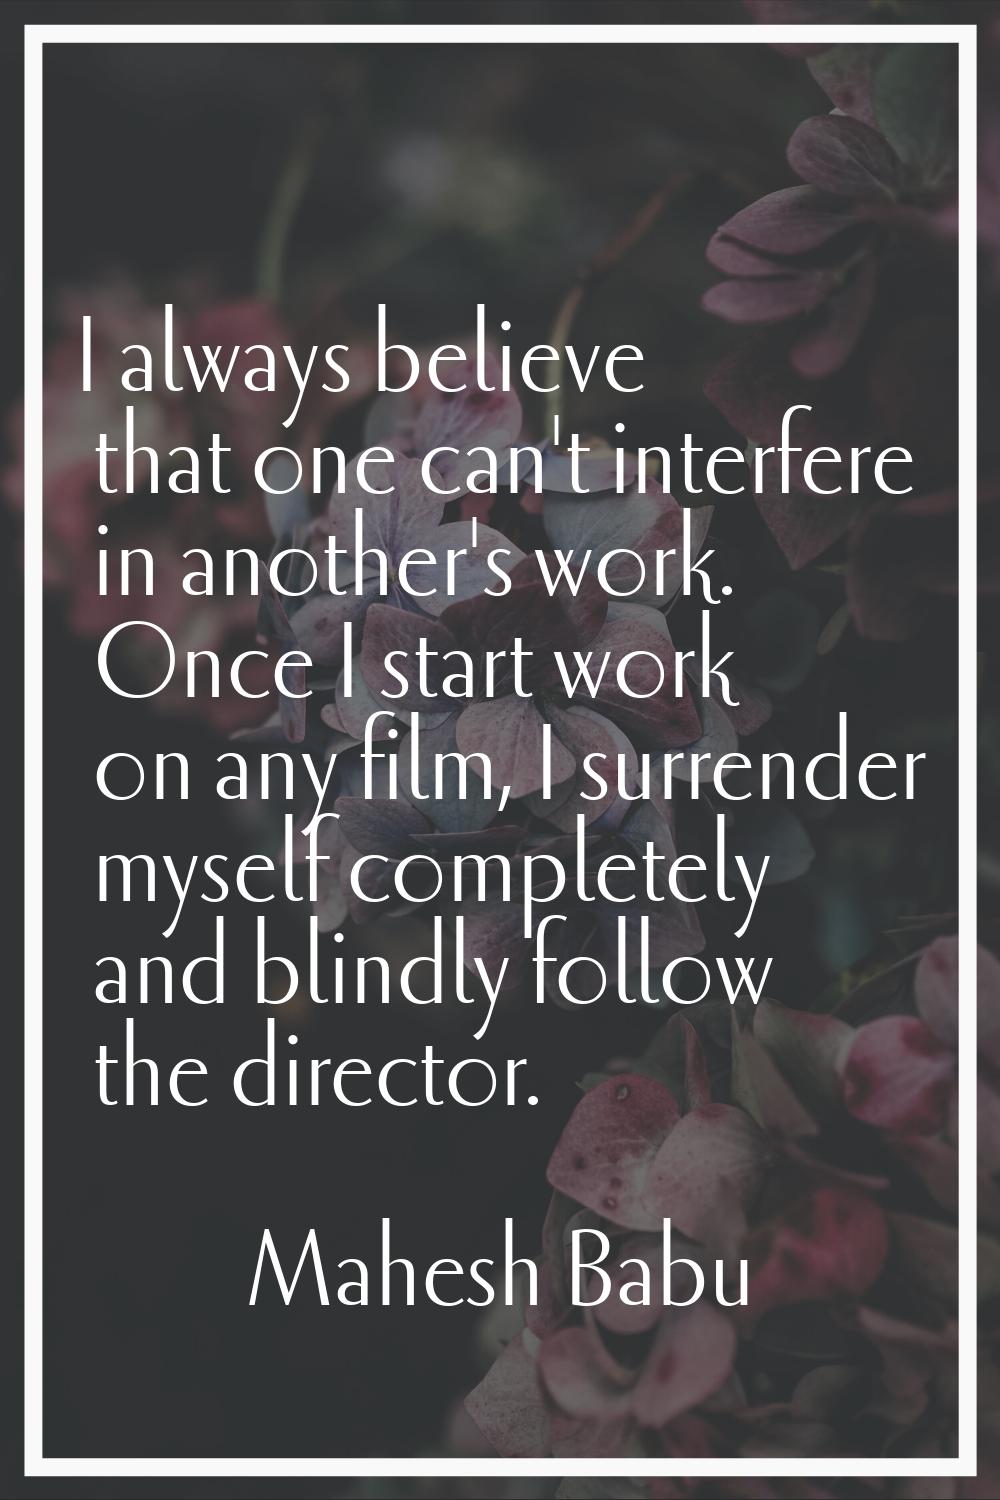 I always believe that one can't interfere in another's work. Once I start work on any film, I surre